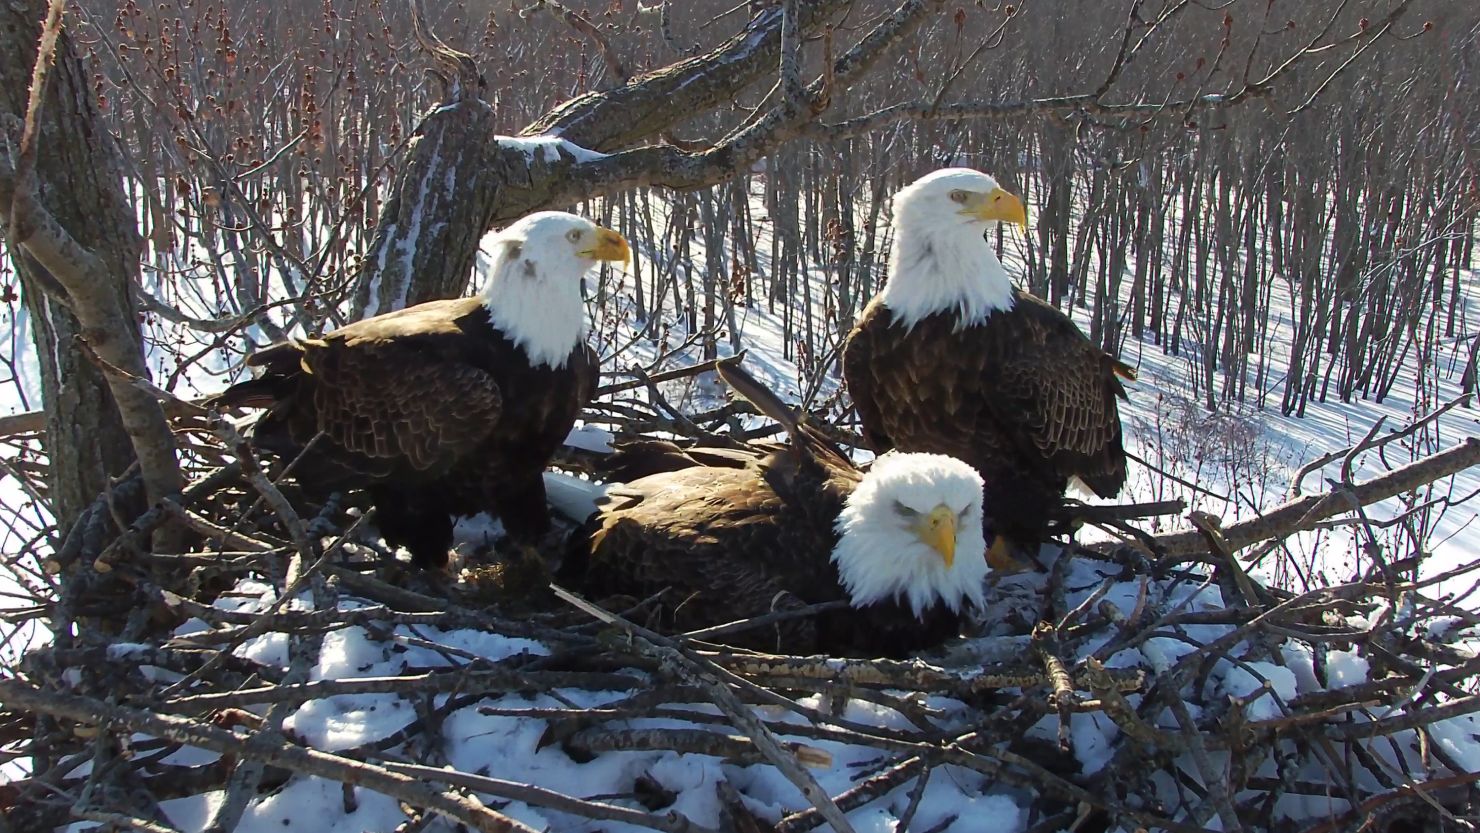 Three bald eagles are tackling the challenges of parenting at this nest in Illinois.